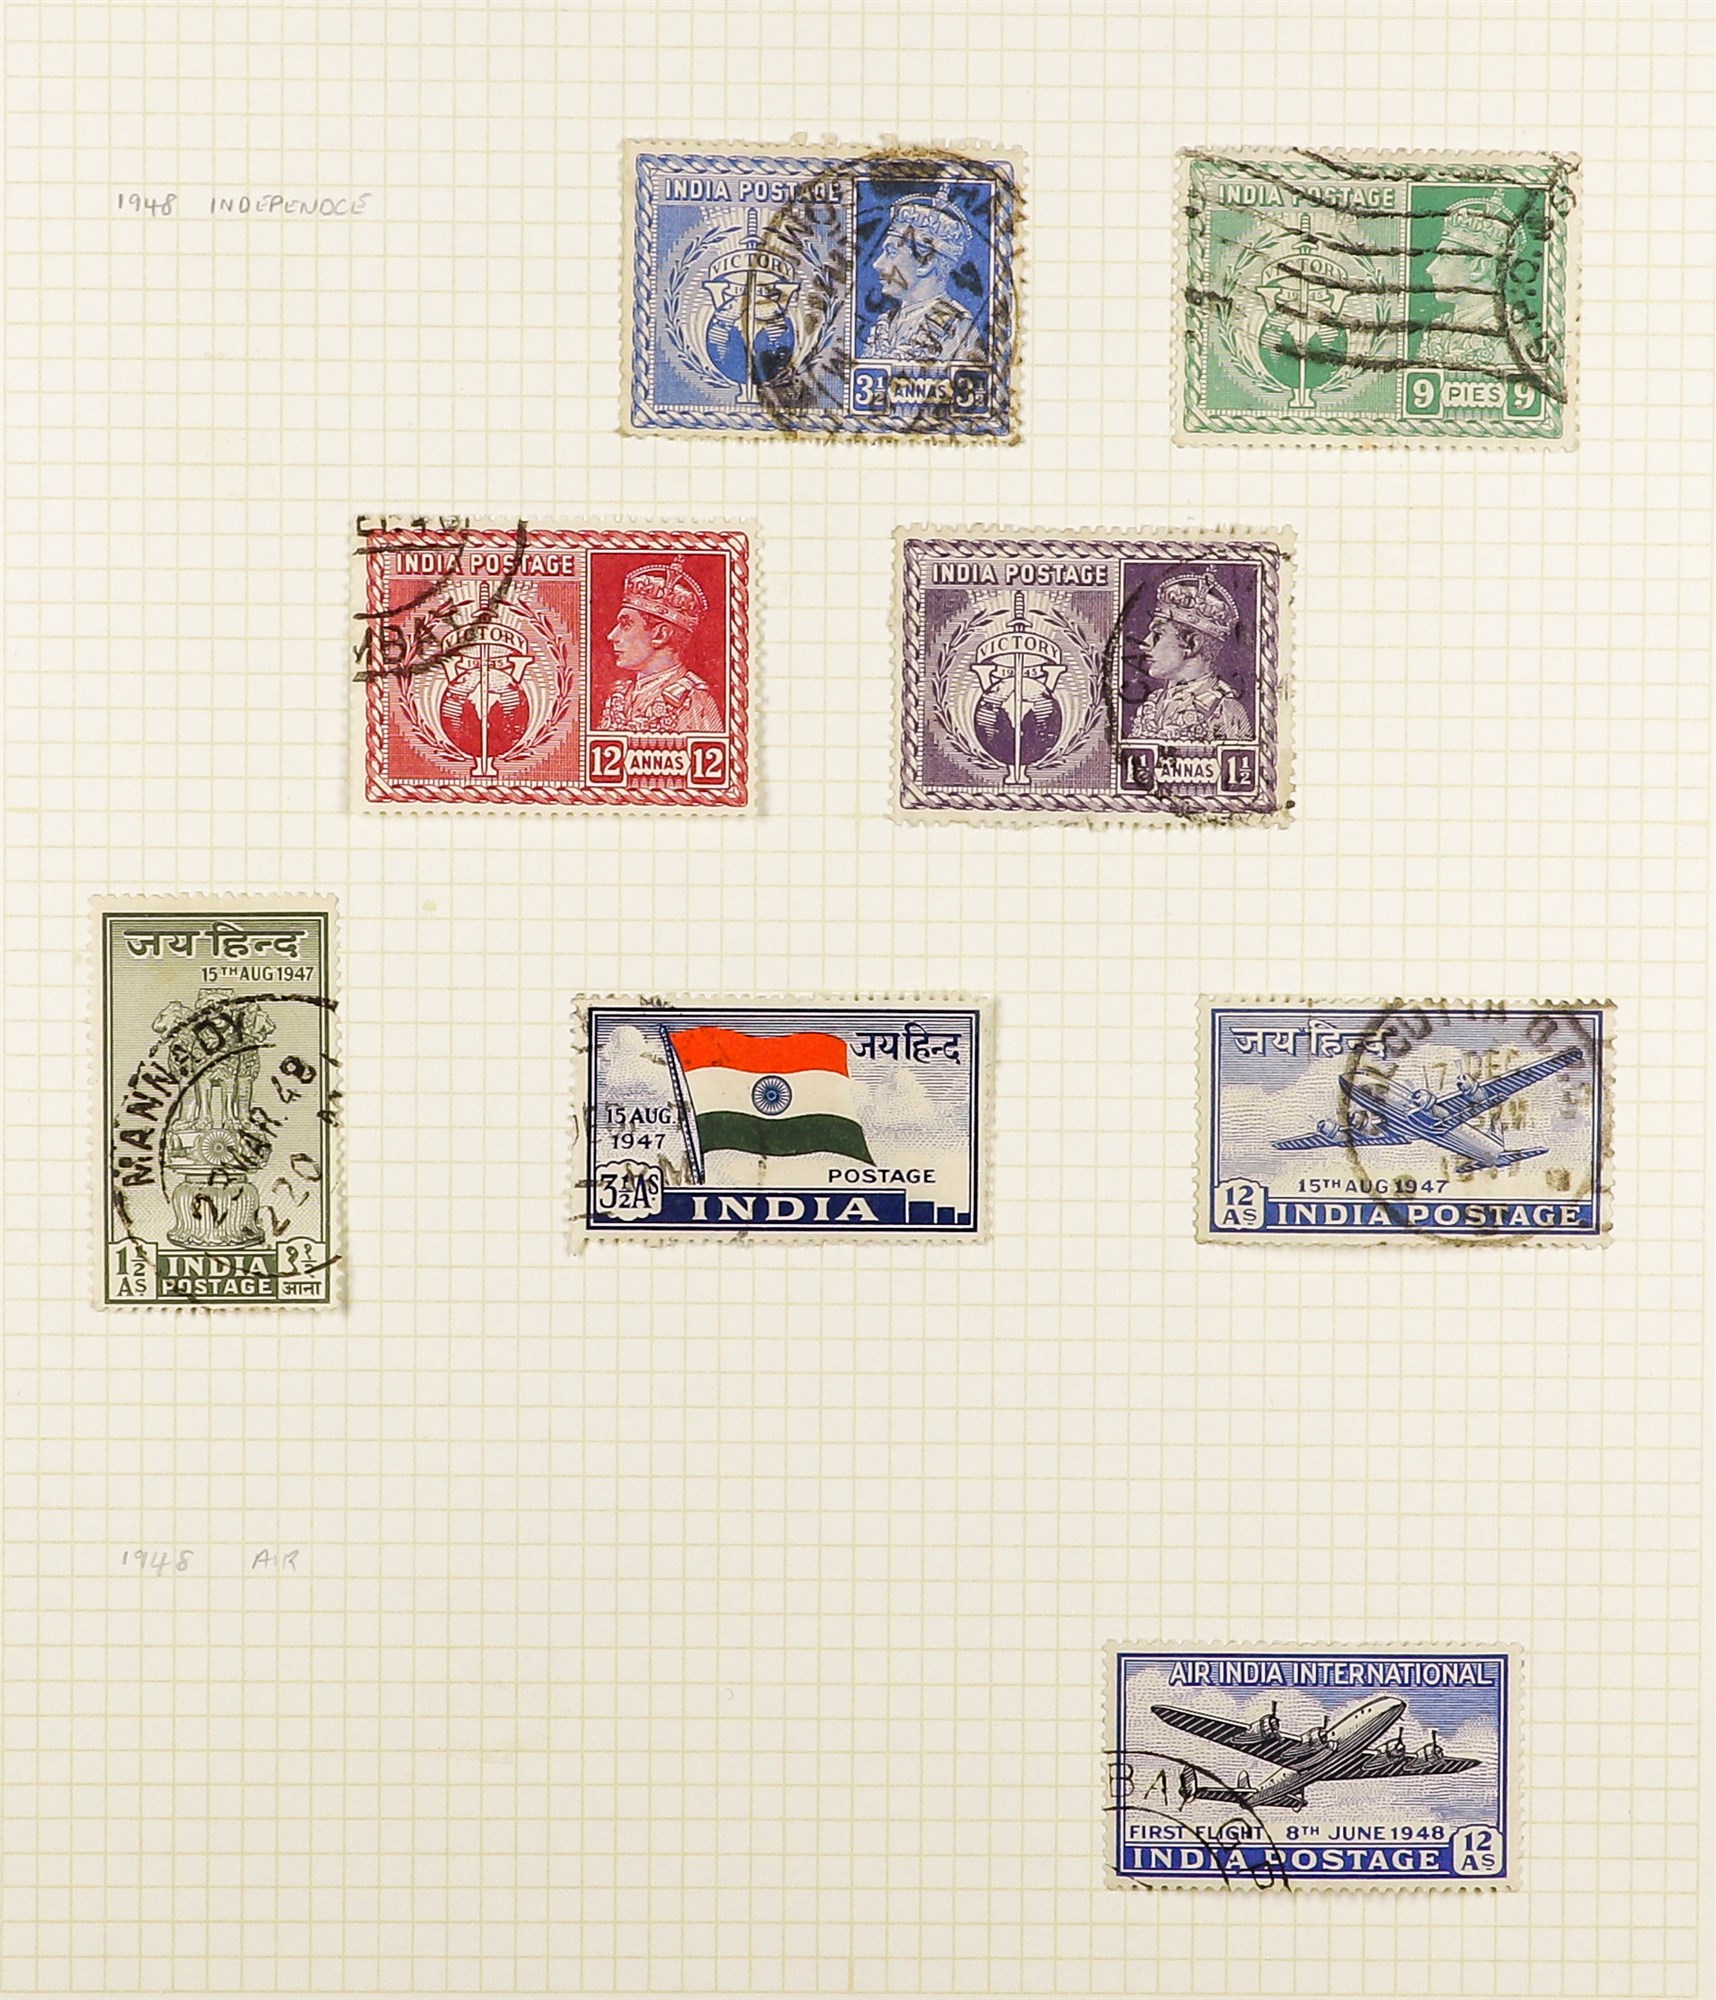 INDIA 1854 - 1952 USED COLLECTION of 400+ stamps on pages, note 1854-55 ½a (2), 1a (5), 2a (3) & 4a, - Image 16 of 27